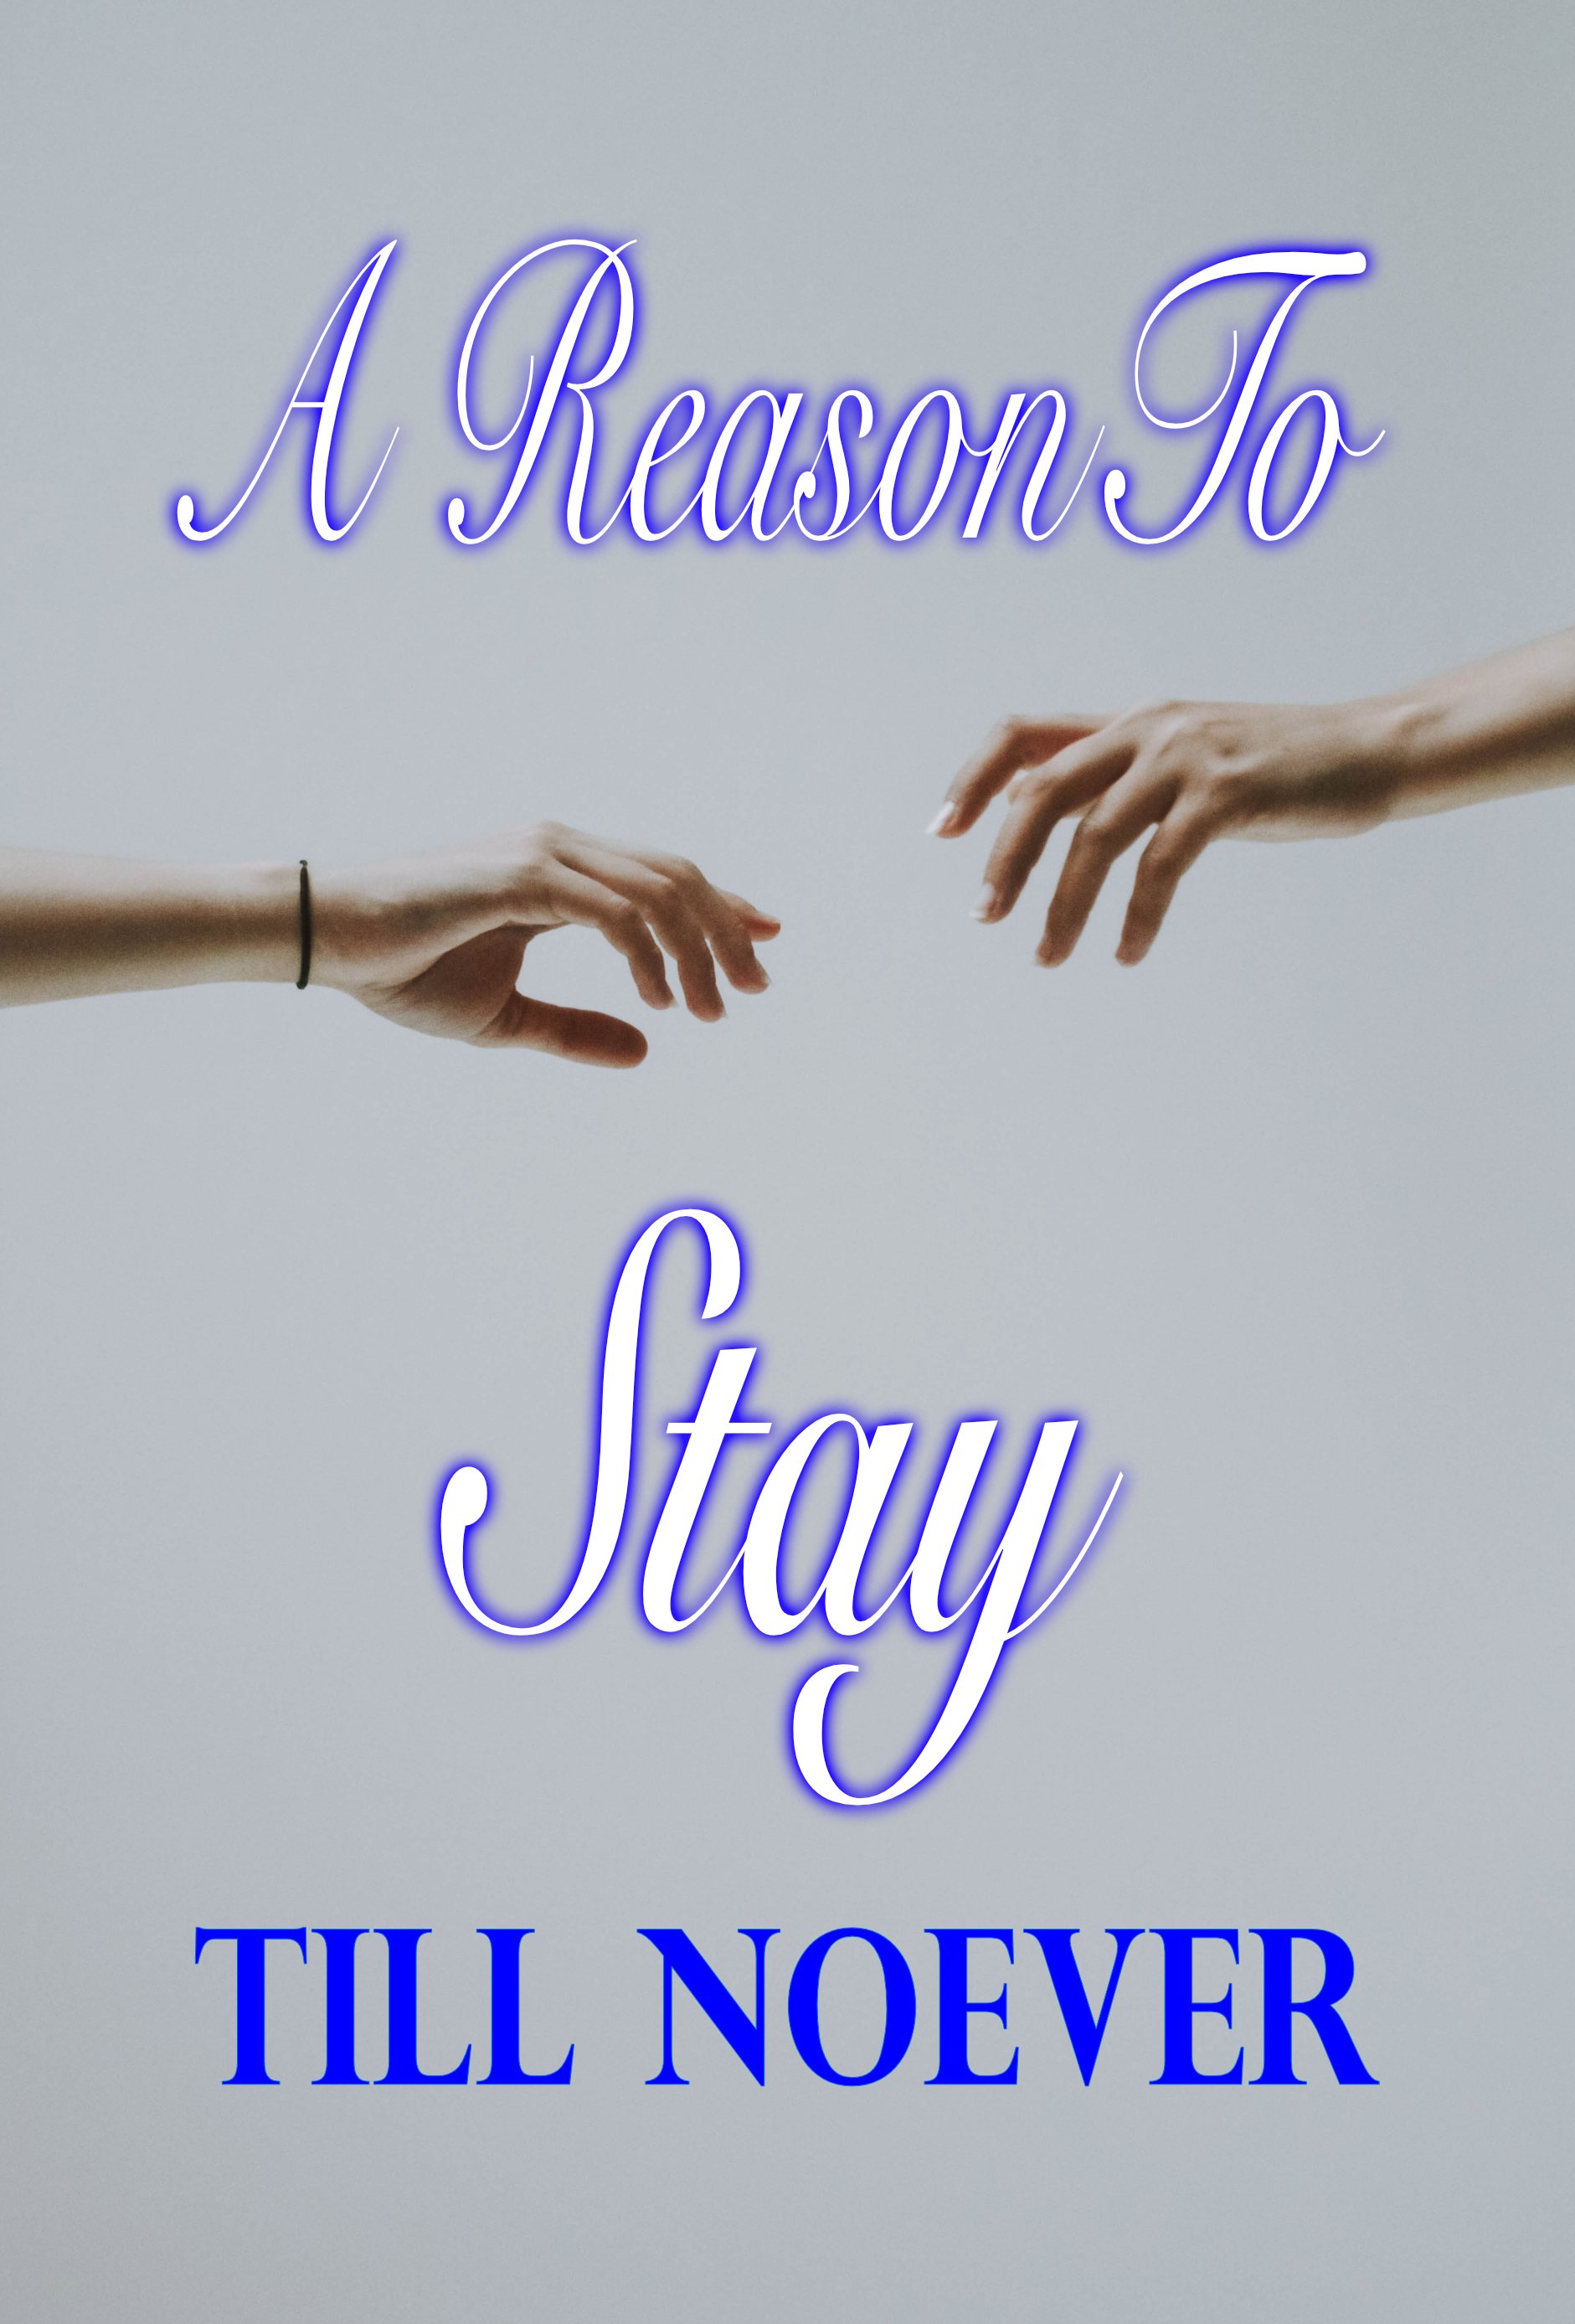 A REASON TO STAY eBook Cover2.0.jpg